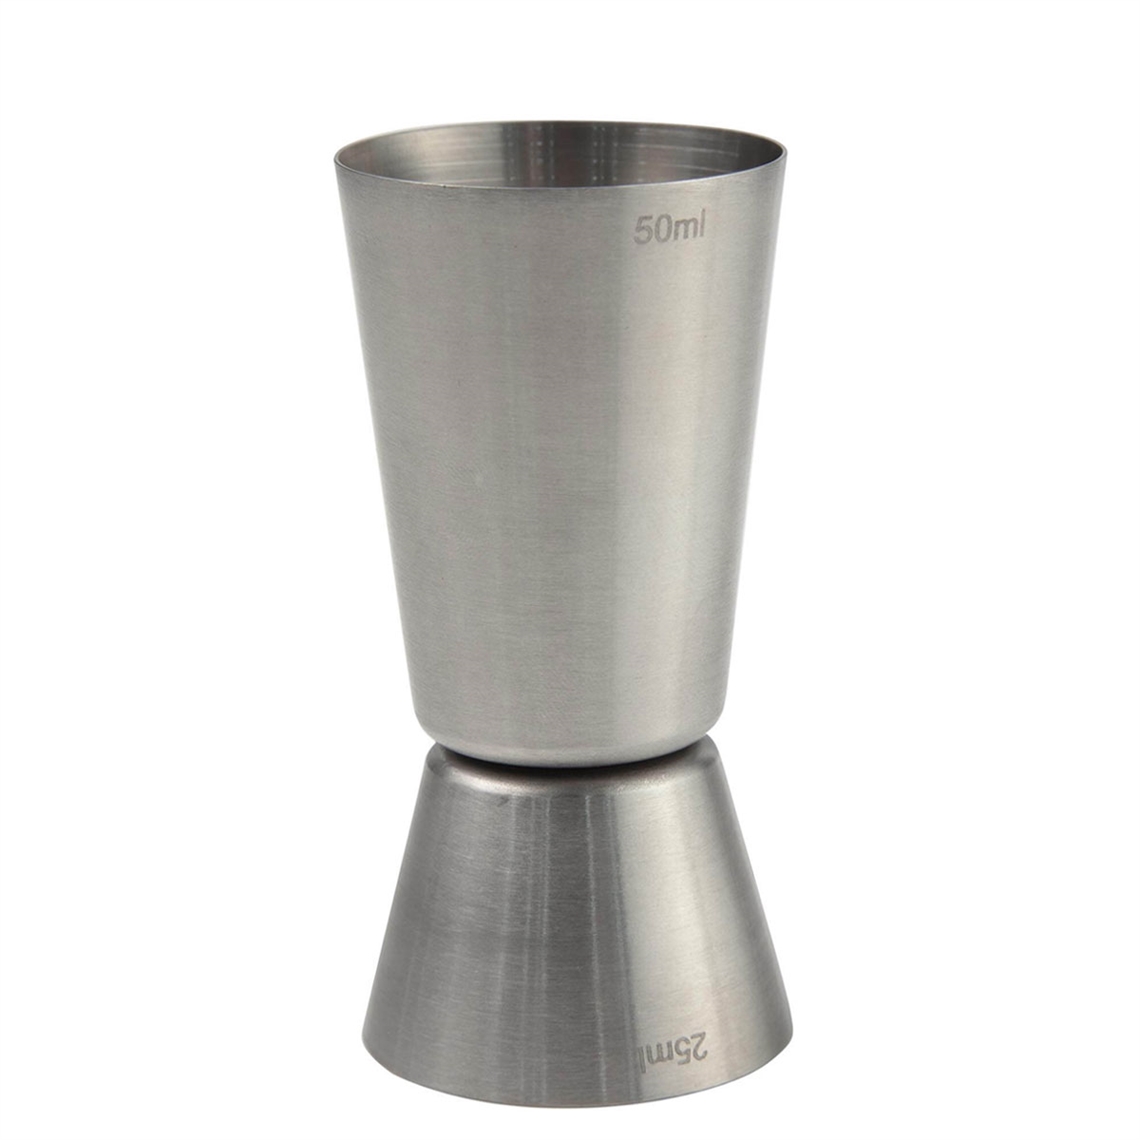 View more how to store wine in a restaurant or bar from our Spirit and Wine Bar Thimble Measures range